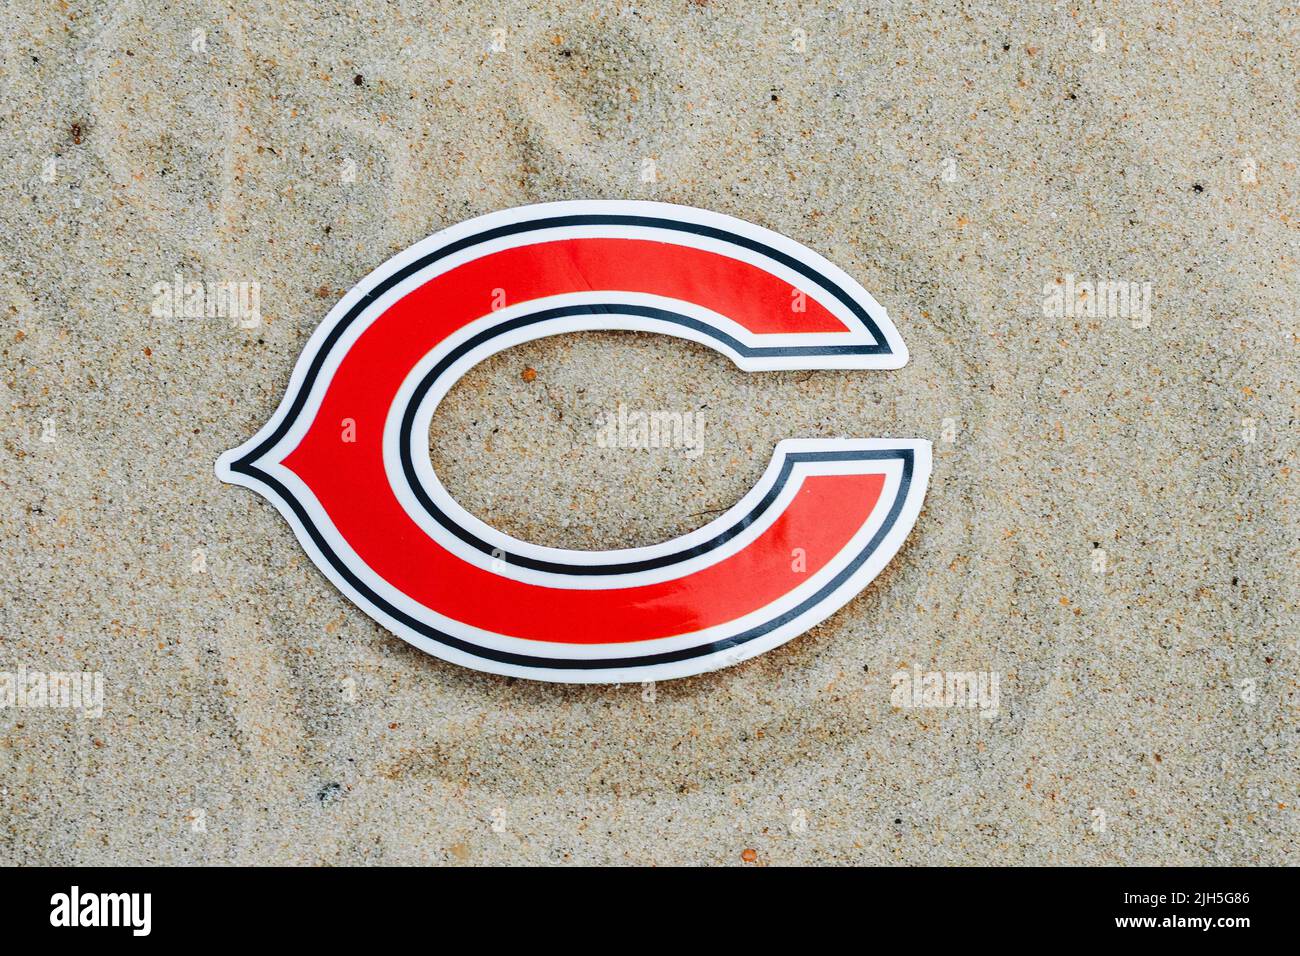 September 15, 2021, Moscow, Russia. The logo of the Chicago Bears football club on the sand of the beach. Stock Photo